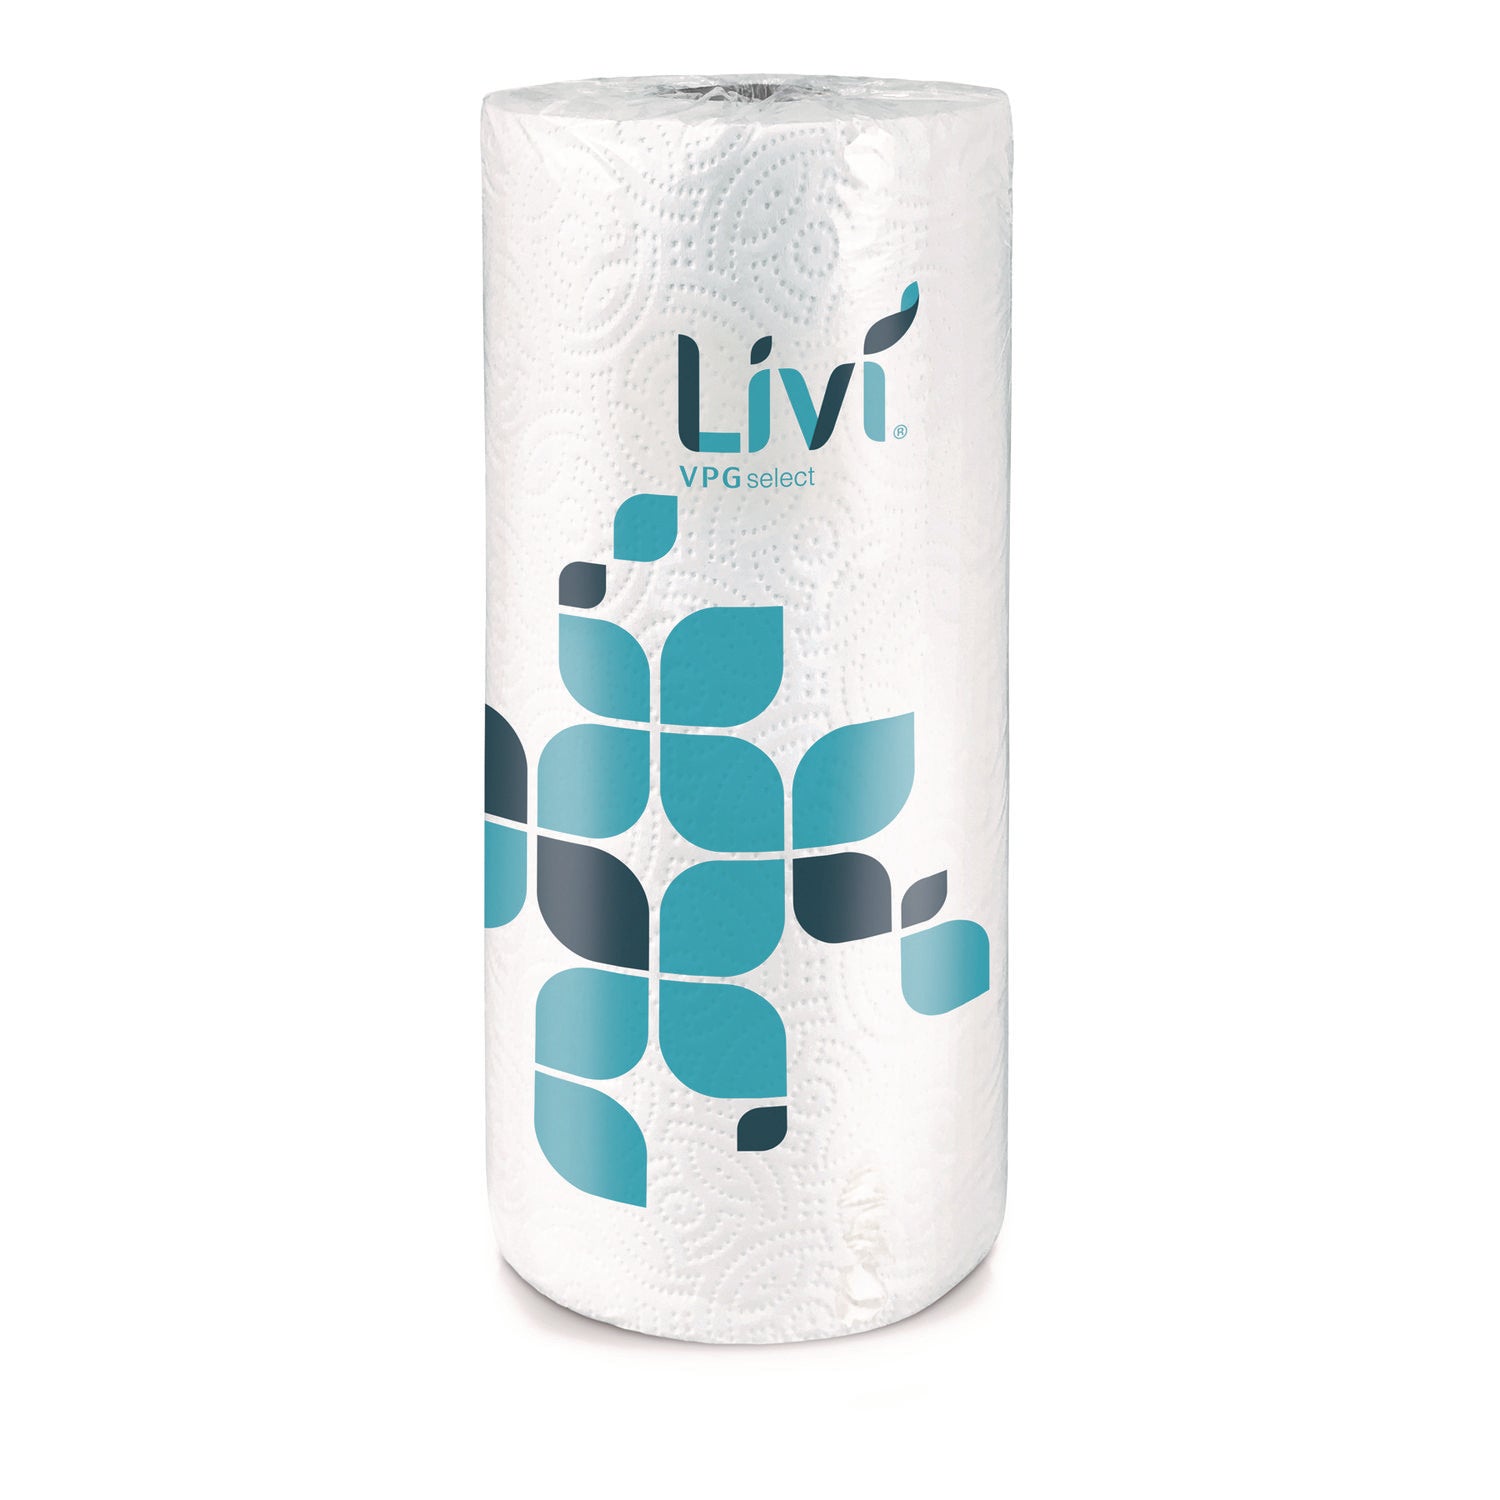 Livi Solaris Paper Two-ply Kitchen Roll Towel - 2 Ply - 9" x 11" - 85 Sheets/Roll - White - Fiber - Absorbent, Eco-friendly, Soft, Embossed - For Kitchen - 30 / Carton - 1